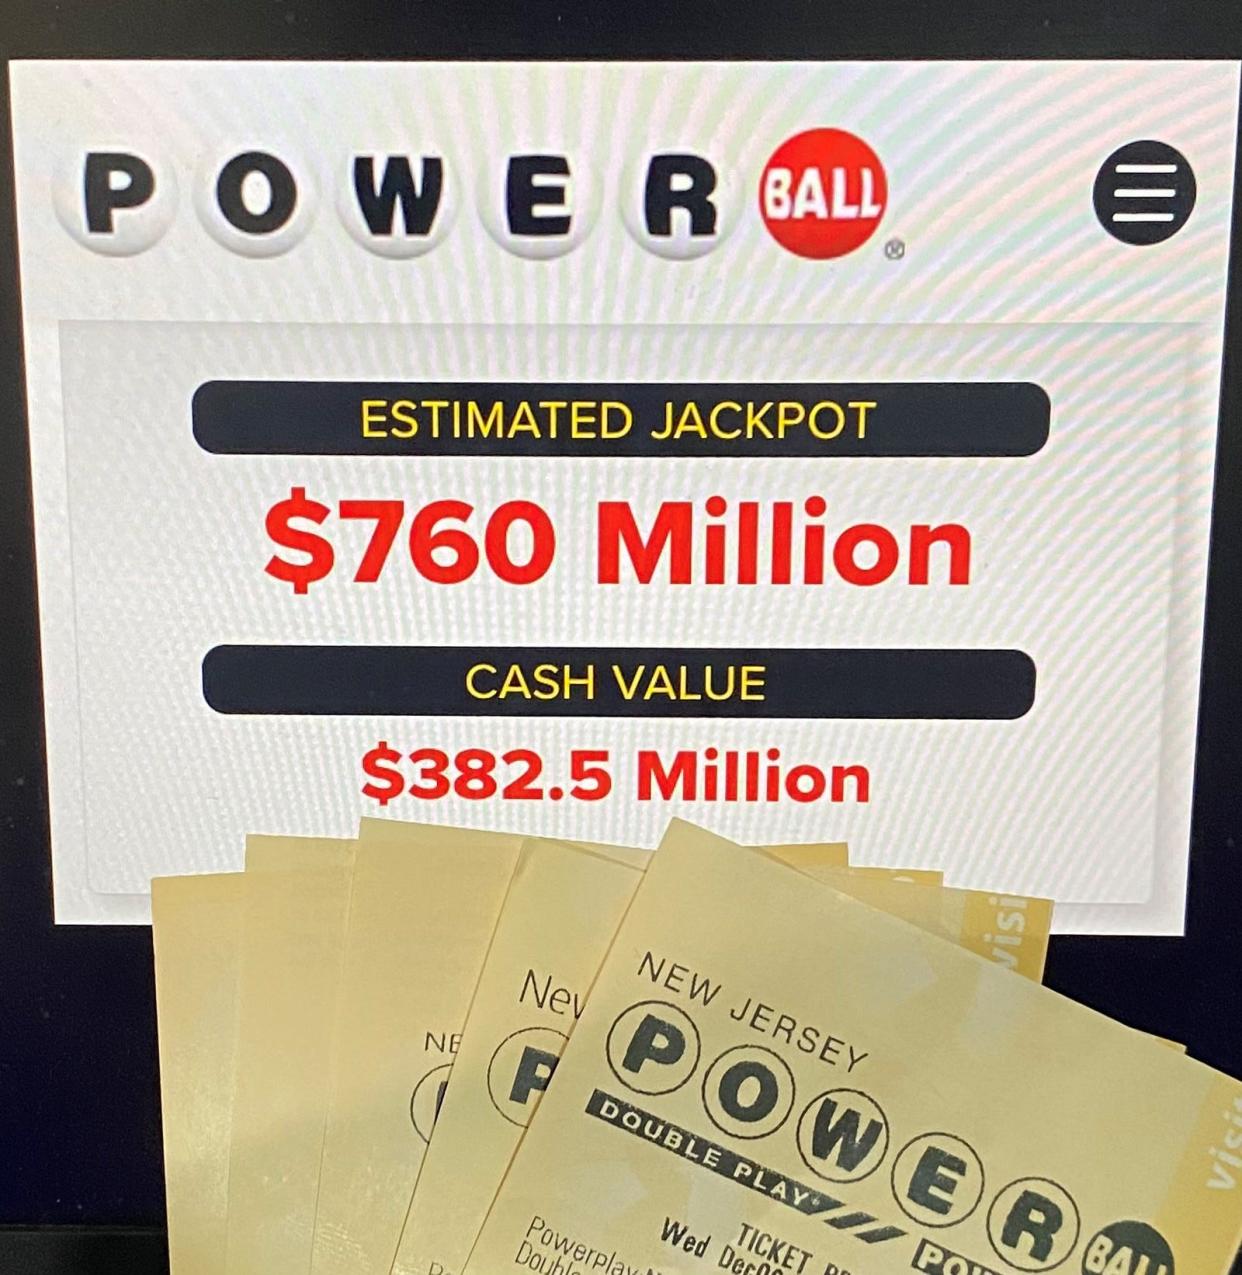 The Powerball jackpot for Saturday, Dec. 30, 2023 will be an estimated $760 million.